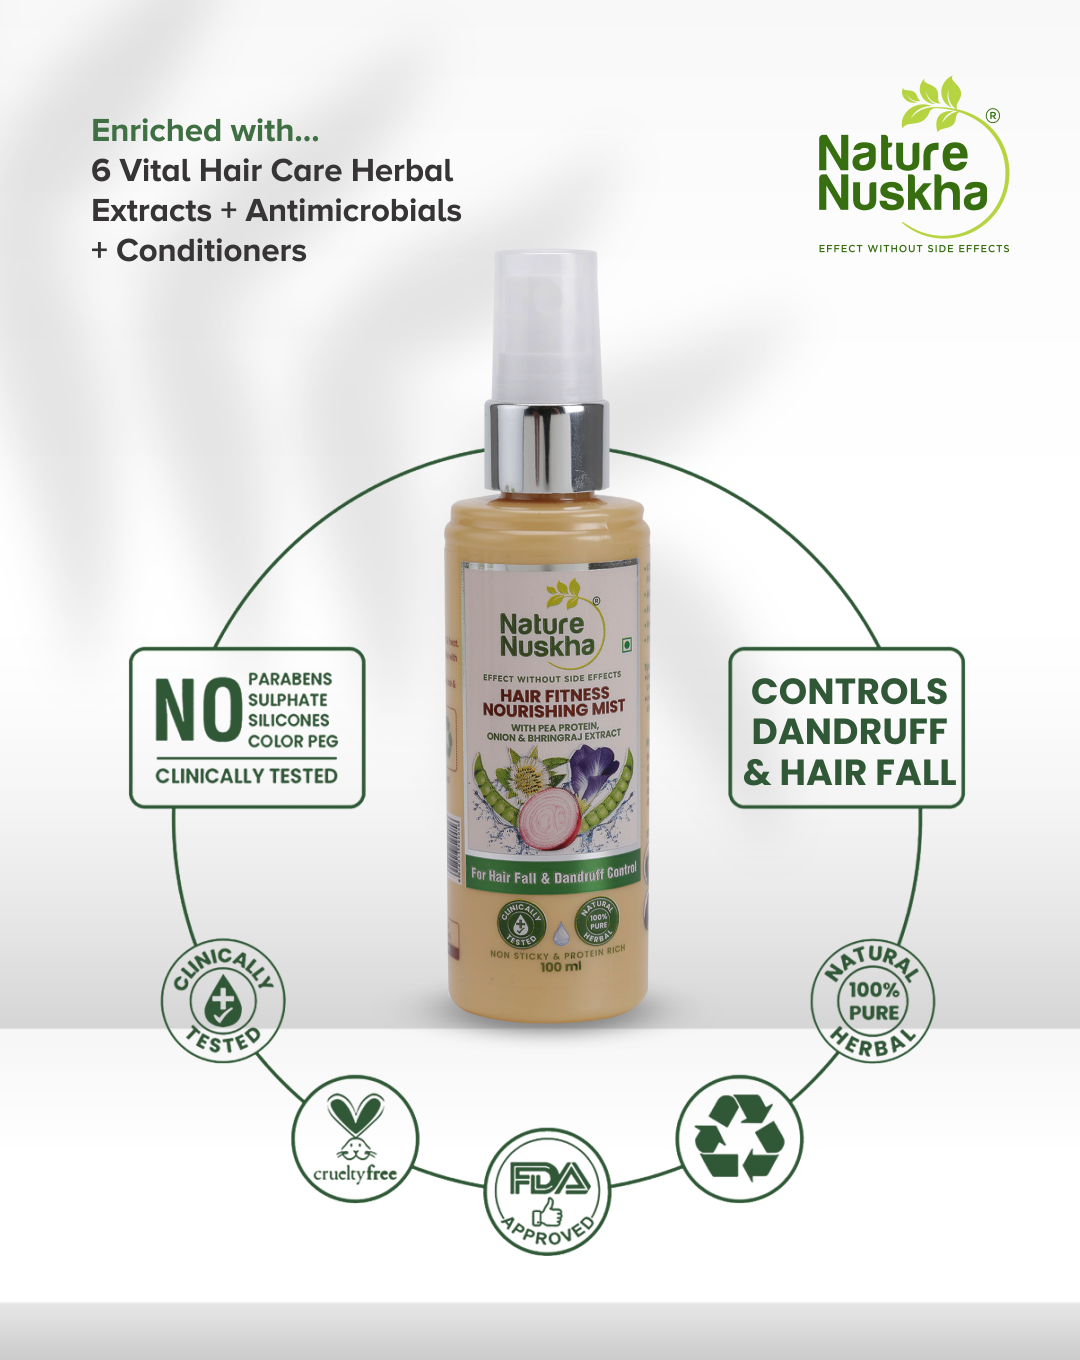 Onion, Pea Protein & Bhringraj Nourishing Hair Mist Spray Non-sticky for Hairfall & Dandruff Control with all Natural Ingredients, (60ml / 100ml)